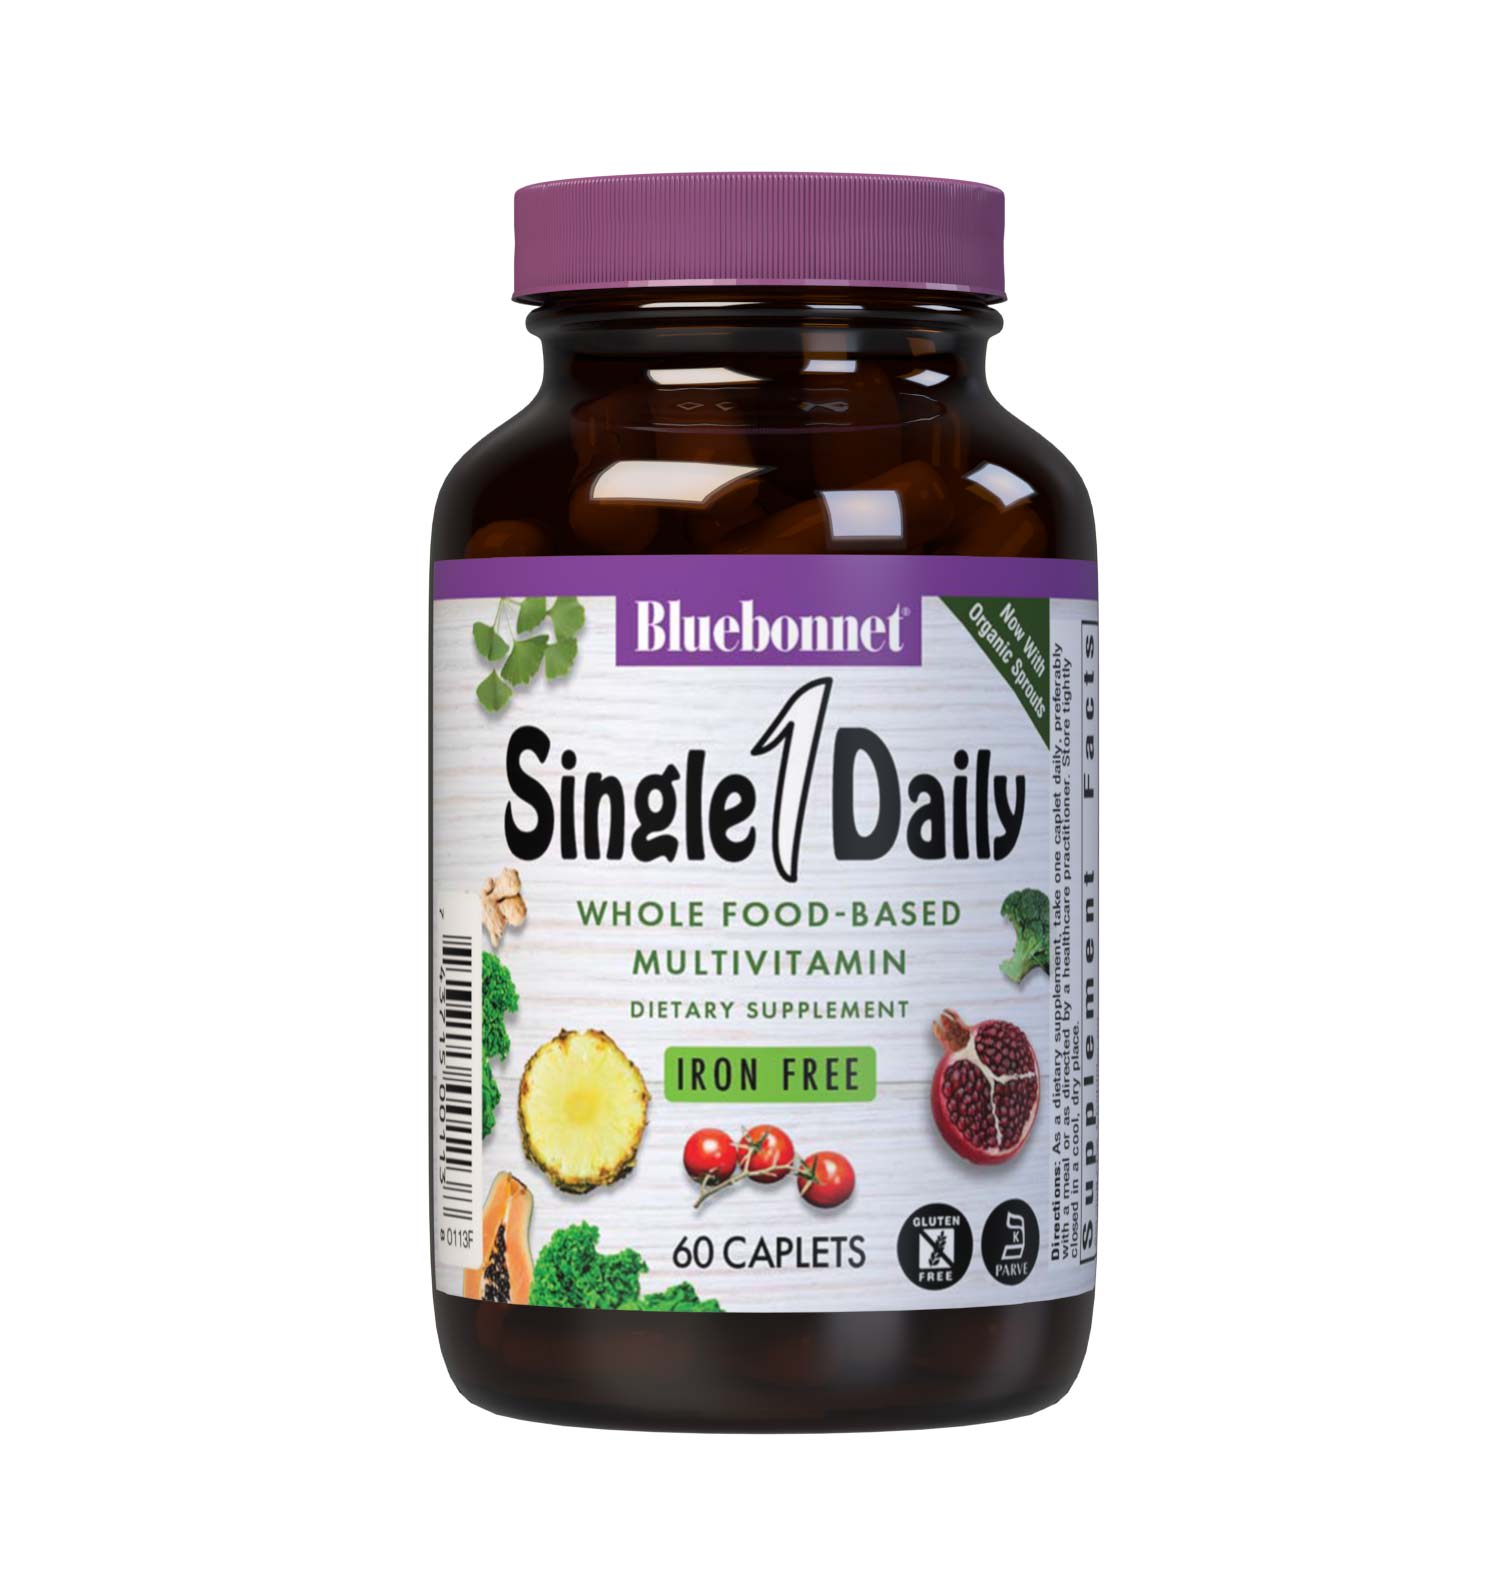 SingleDaily Multiple (Iron-Free) 60 caplets whole food-based formula offers essential vitamins, minerals and enzymes from unique, kosher-certified, plant-based ingredients, such as adaptogenic and immune-boosting herbs, greens from nutrient-dense spirulina, chlorella and chlorophyll, lycopene from tomatoes and potent anti-aging antioxidants from pomegranate fruit. #size_60 count